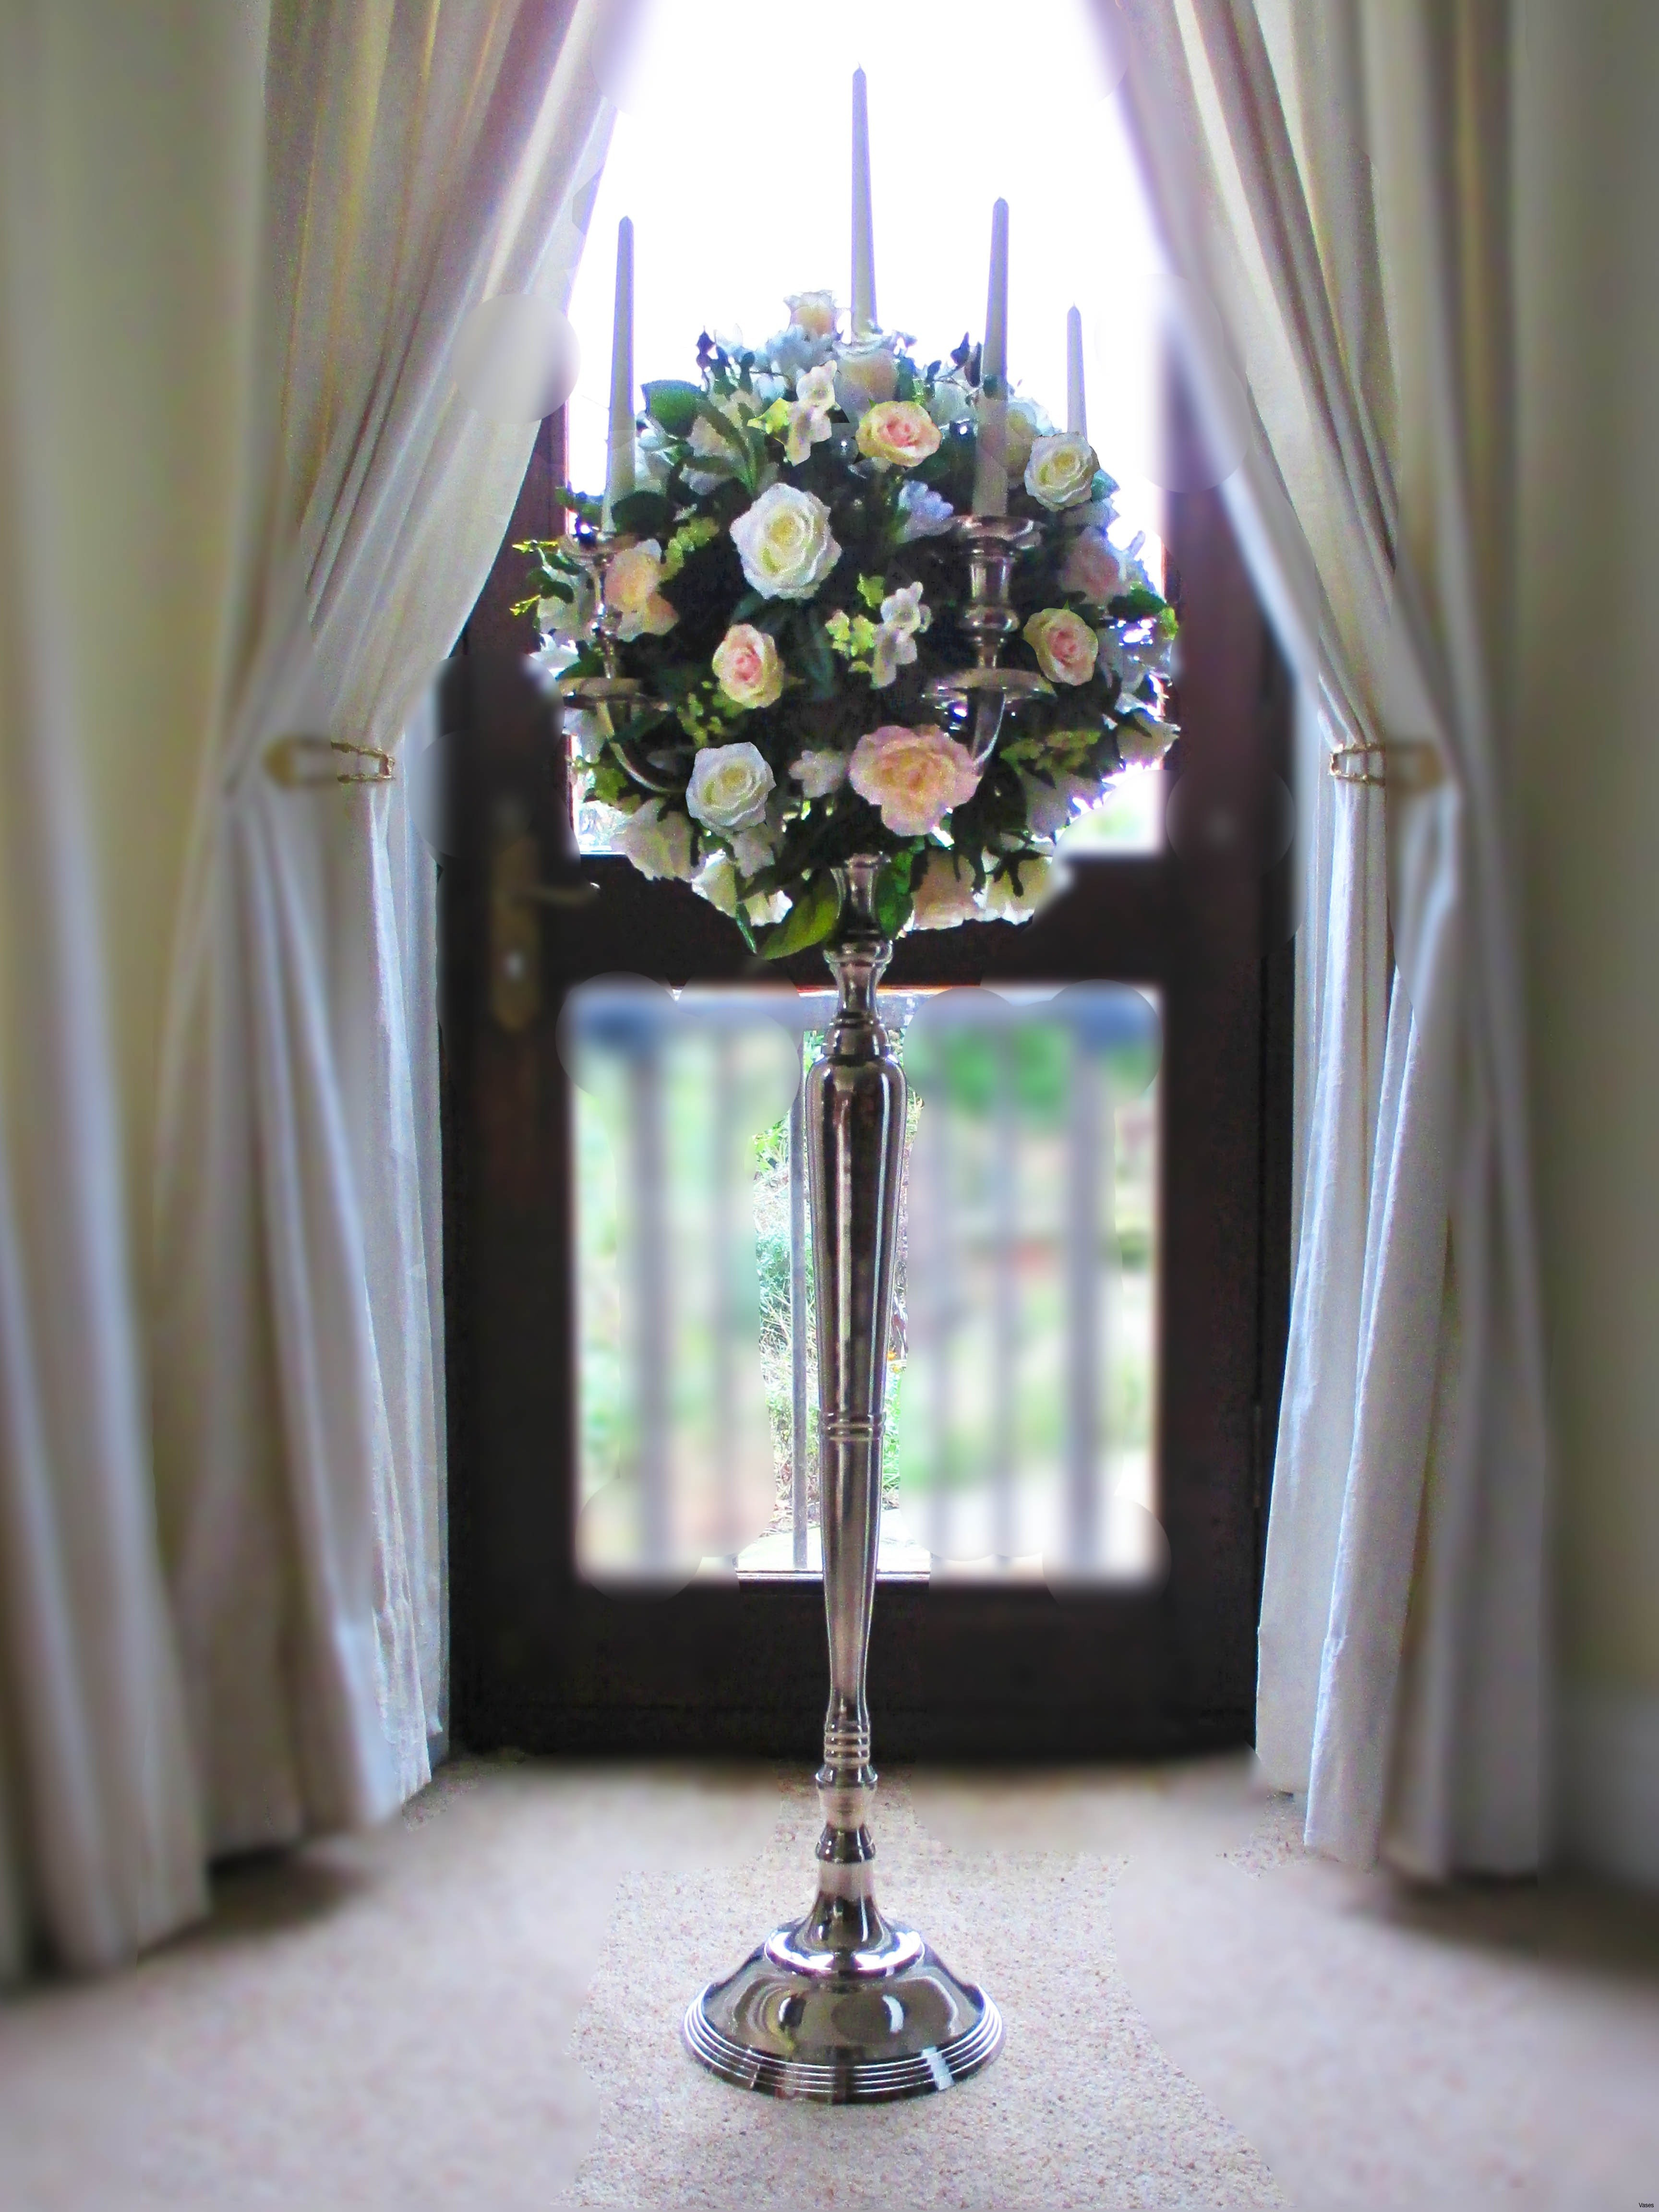 24 Stunning Extra Tall Vases Wedding 2024 free download extra tall vases wedding of pictures of silver square vase vases artificial plants collection regarding silver square vase gallery cheap wedding bouquets packages 5397h vases silver vase lee